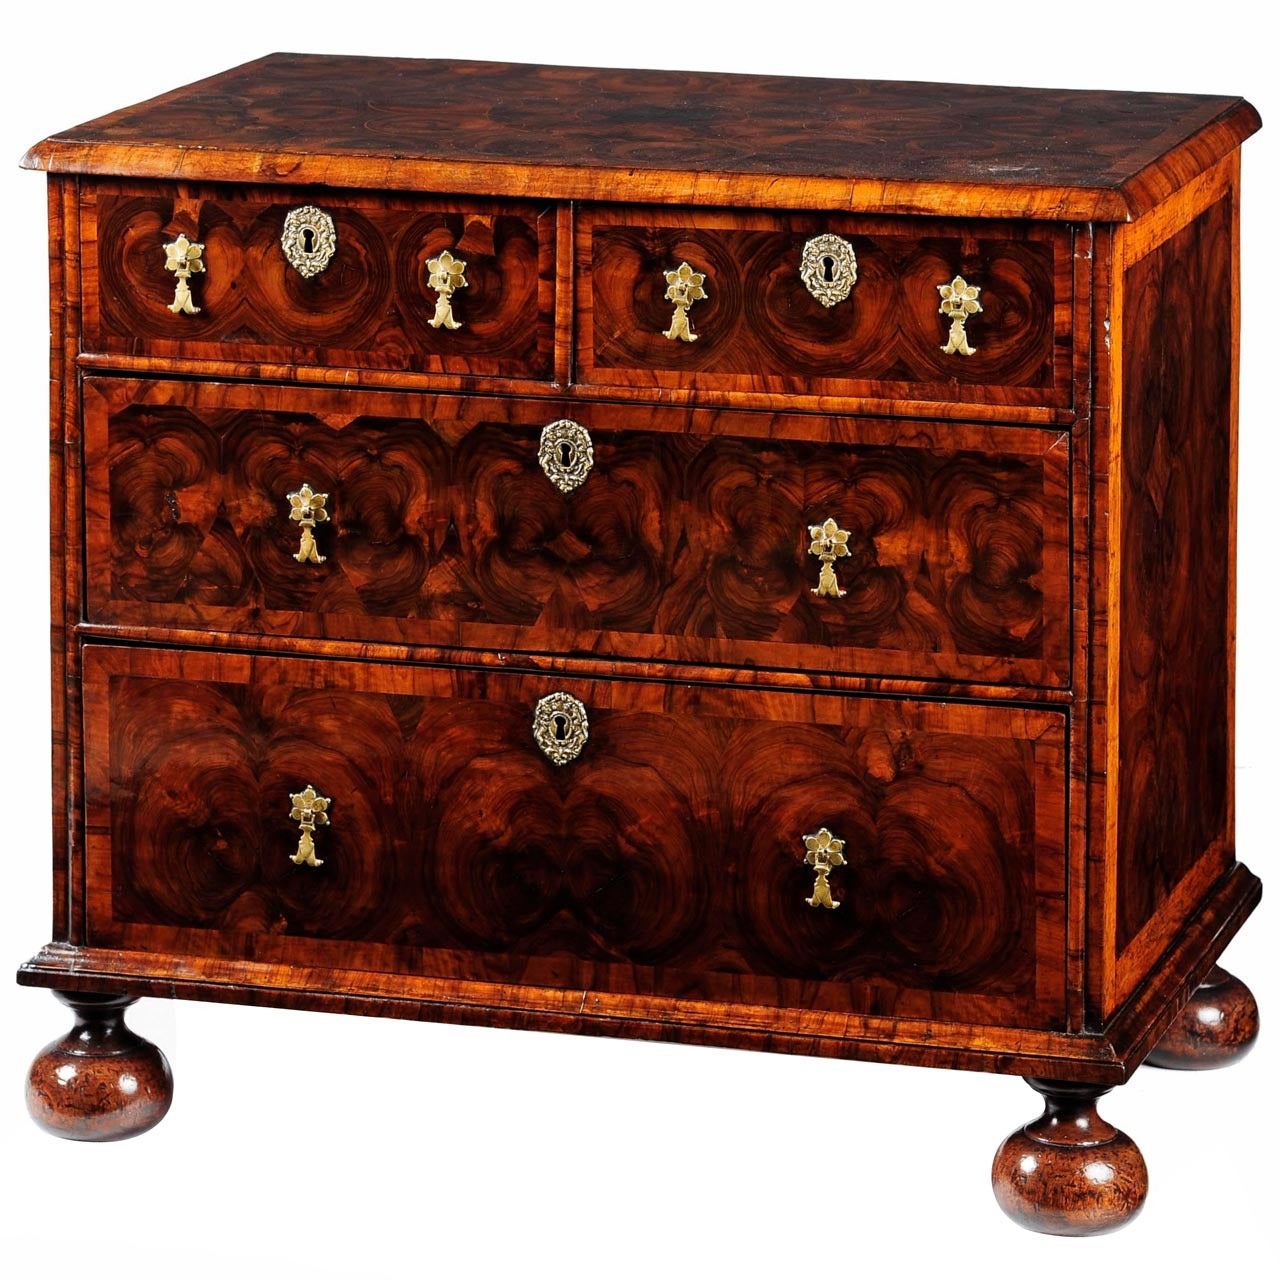 William & Mary olivewood oyster veneered compact chest